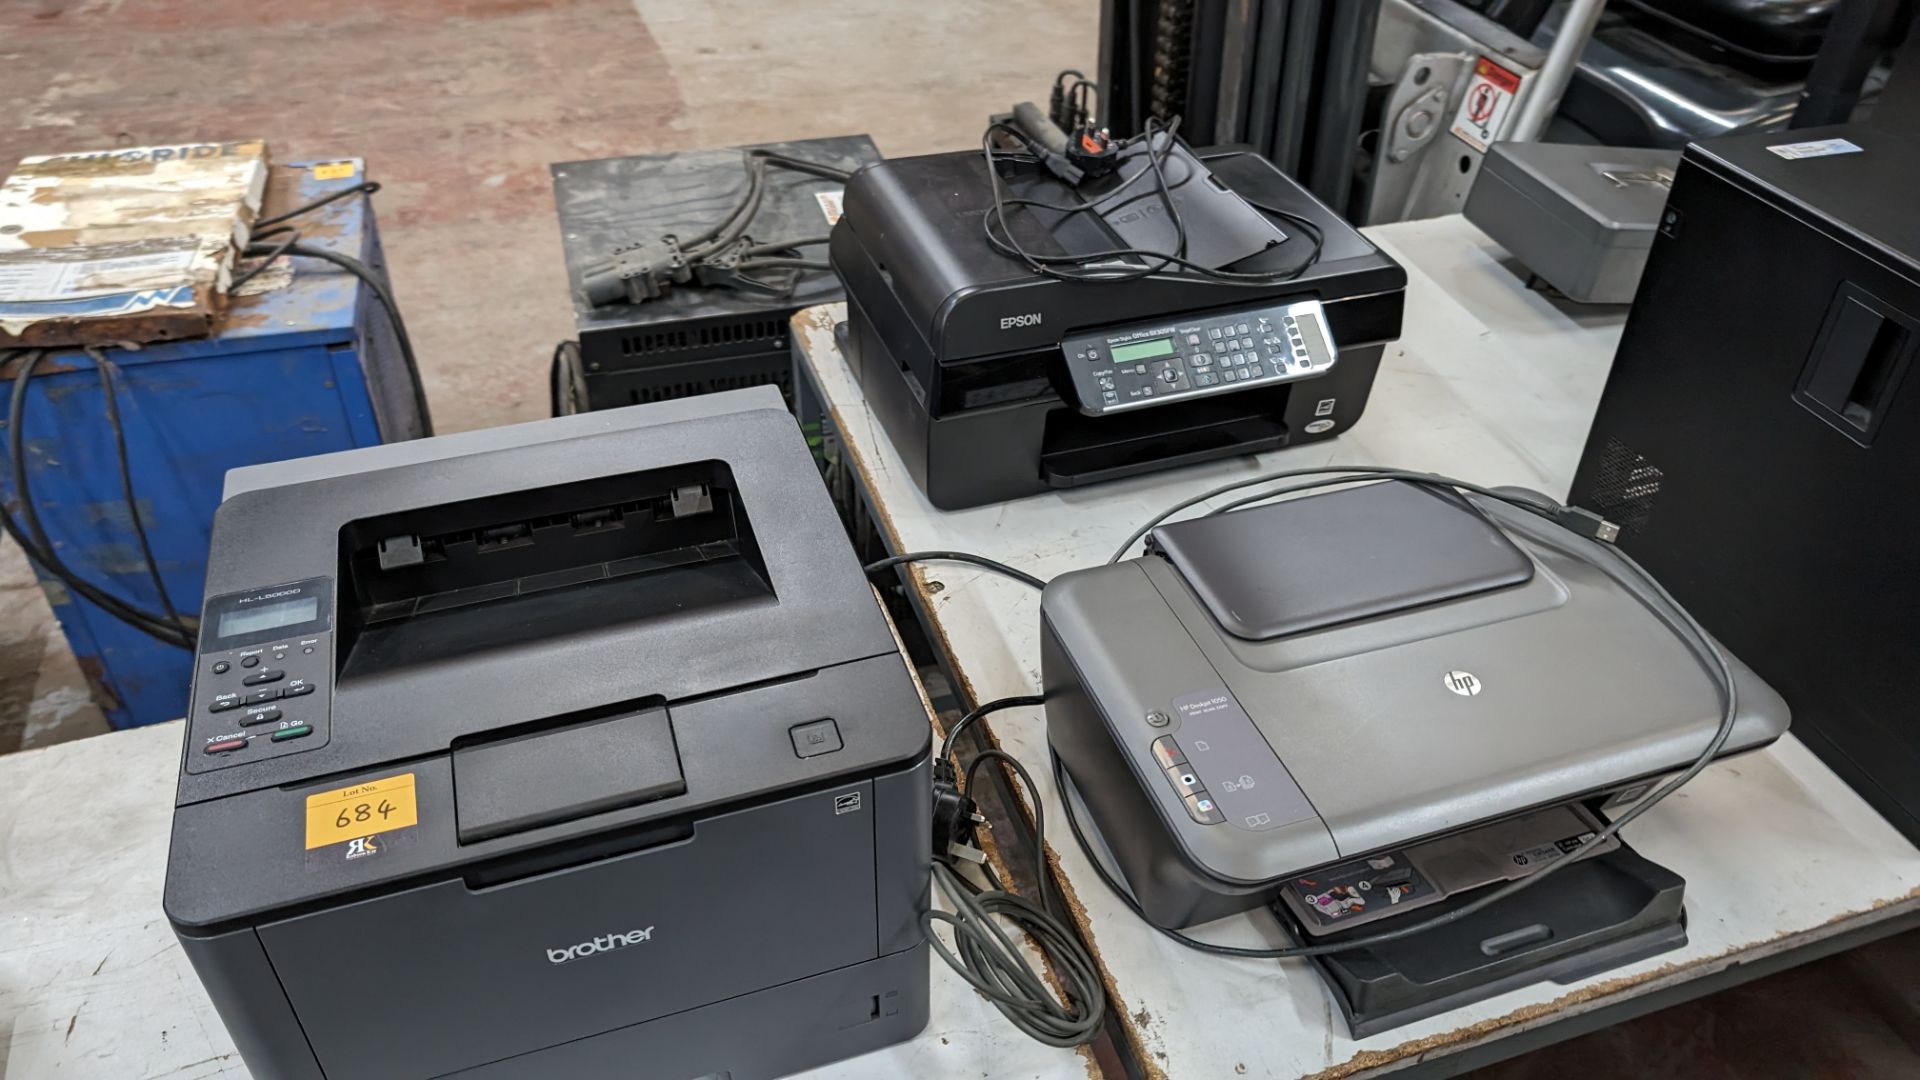 3 off assorted printers by Brother, HP and Epson - Bild 6 aus 6